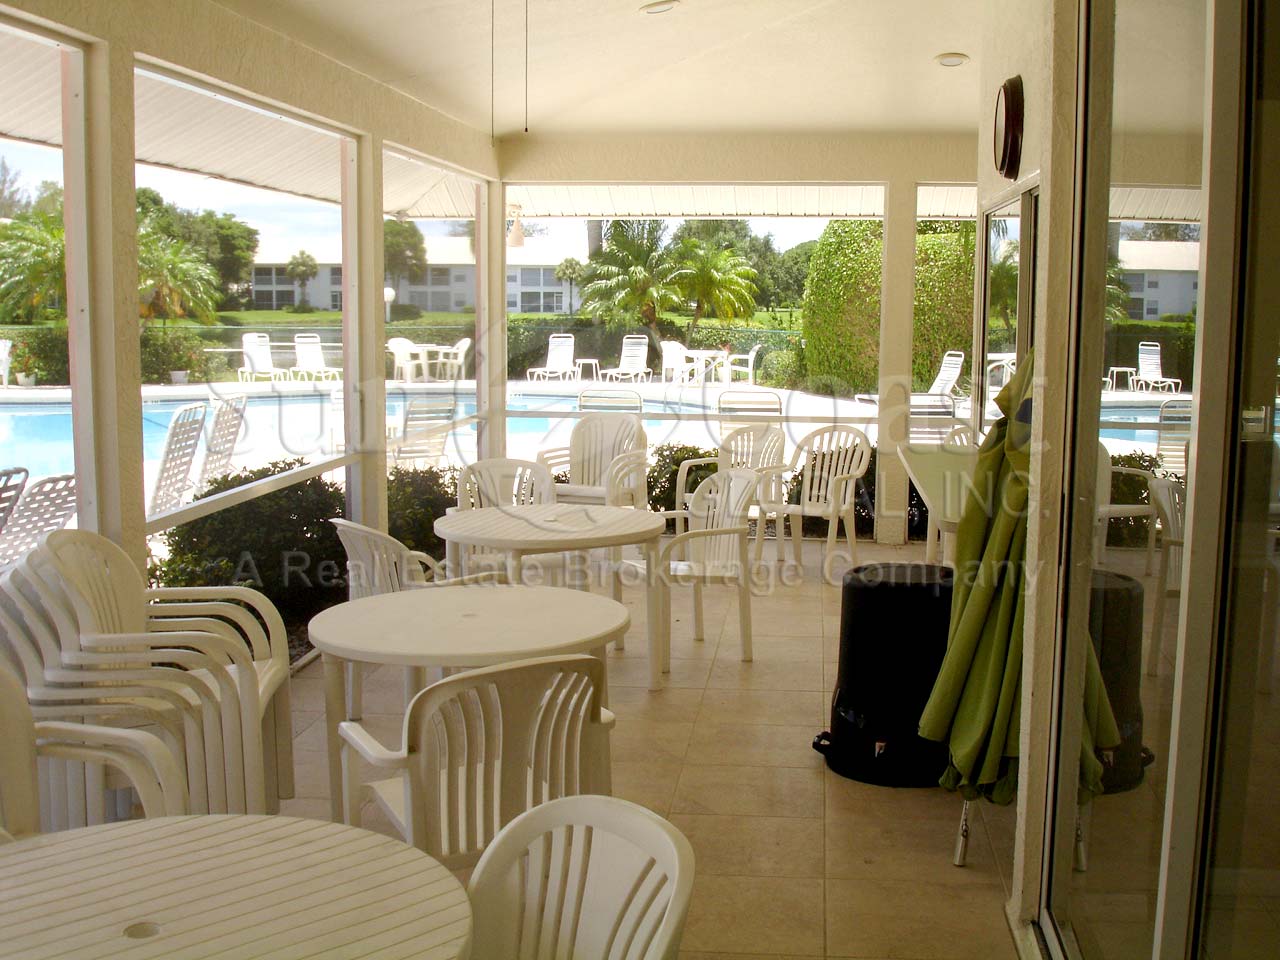 Bermuda Greens clubhouse and pool